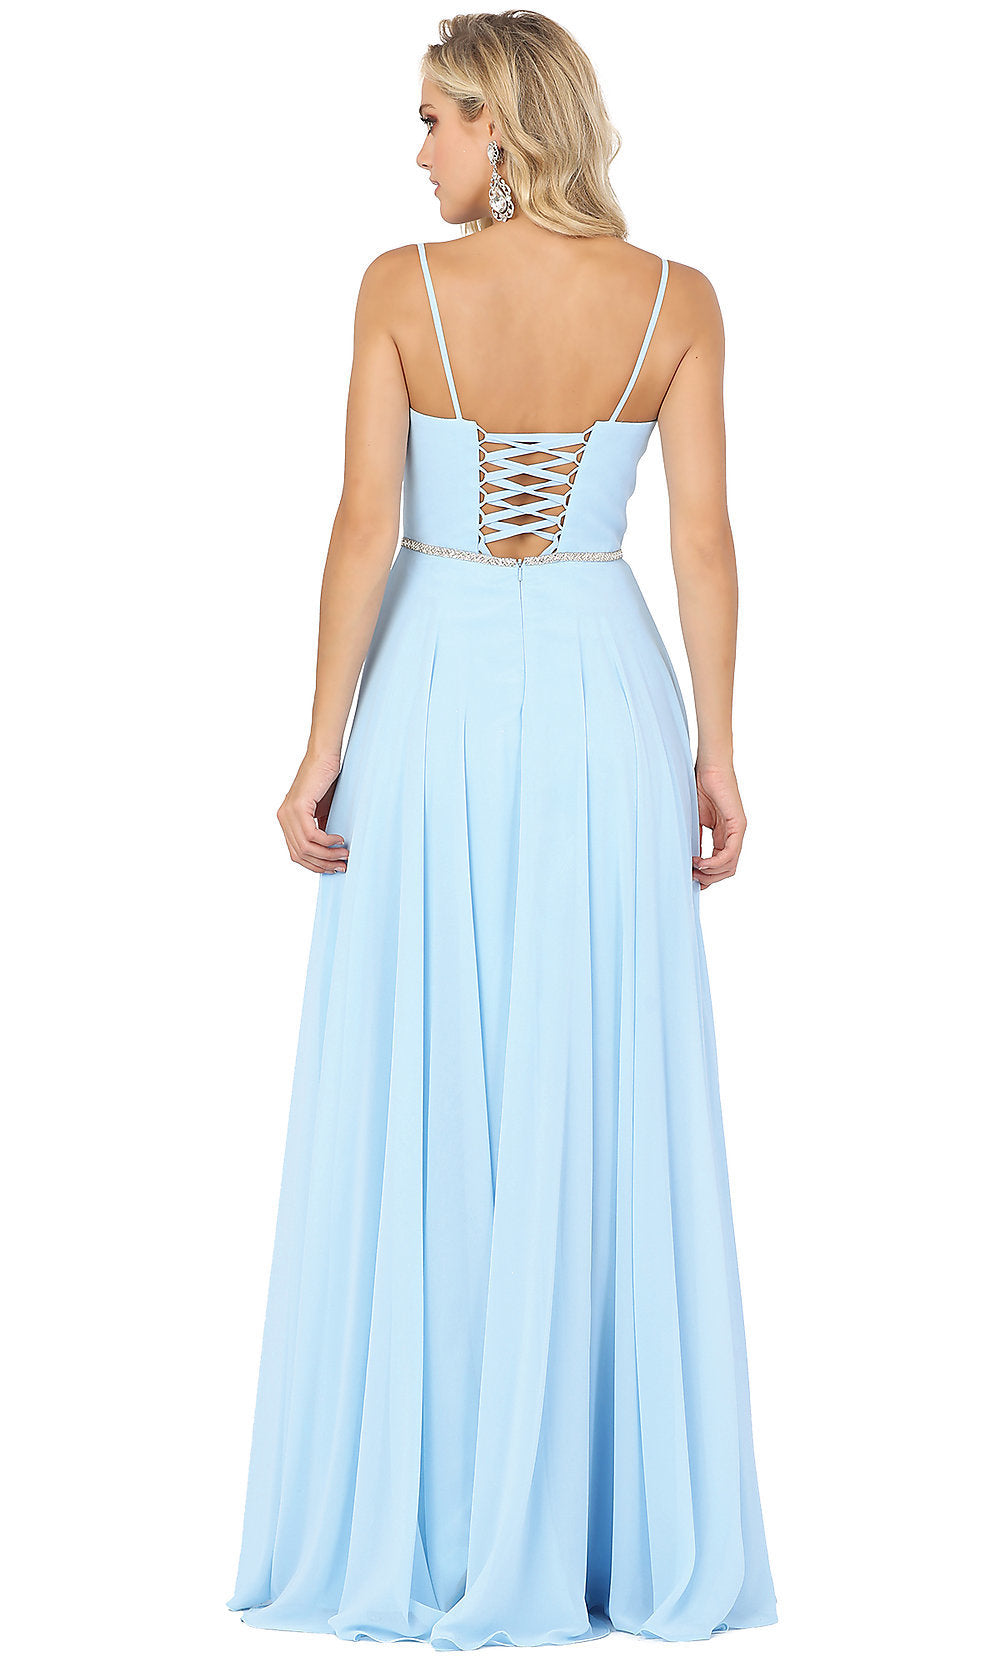  Corset-Back A-Line Prom Gown with Beaded Waist